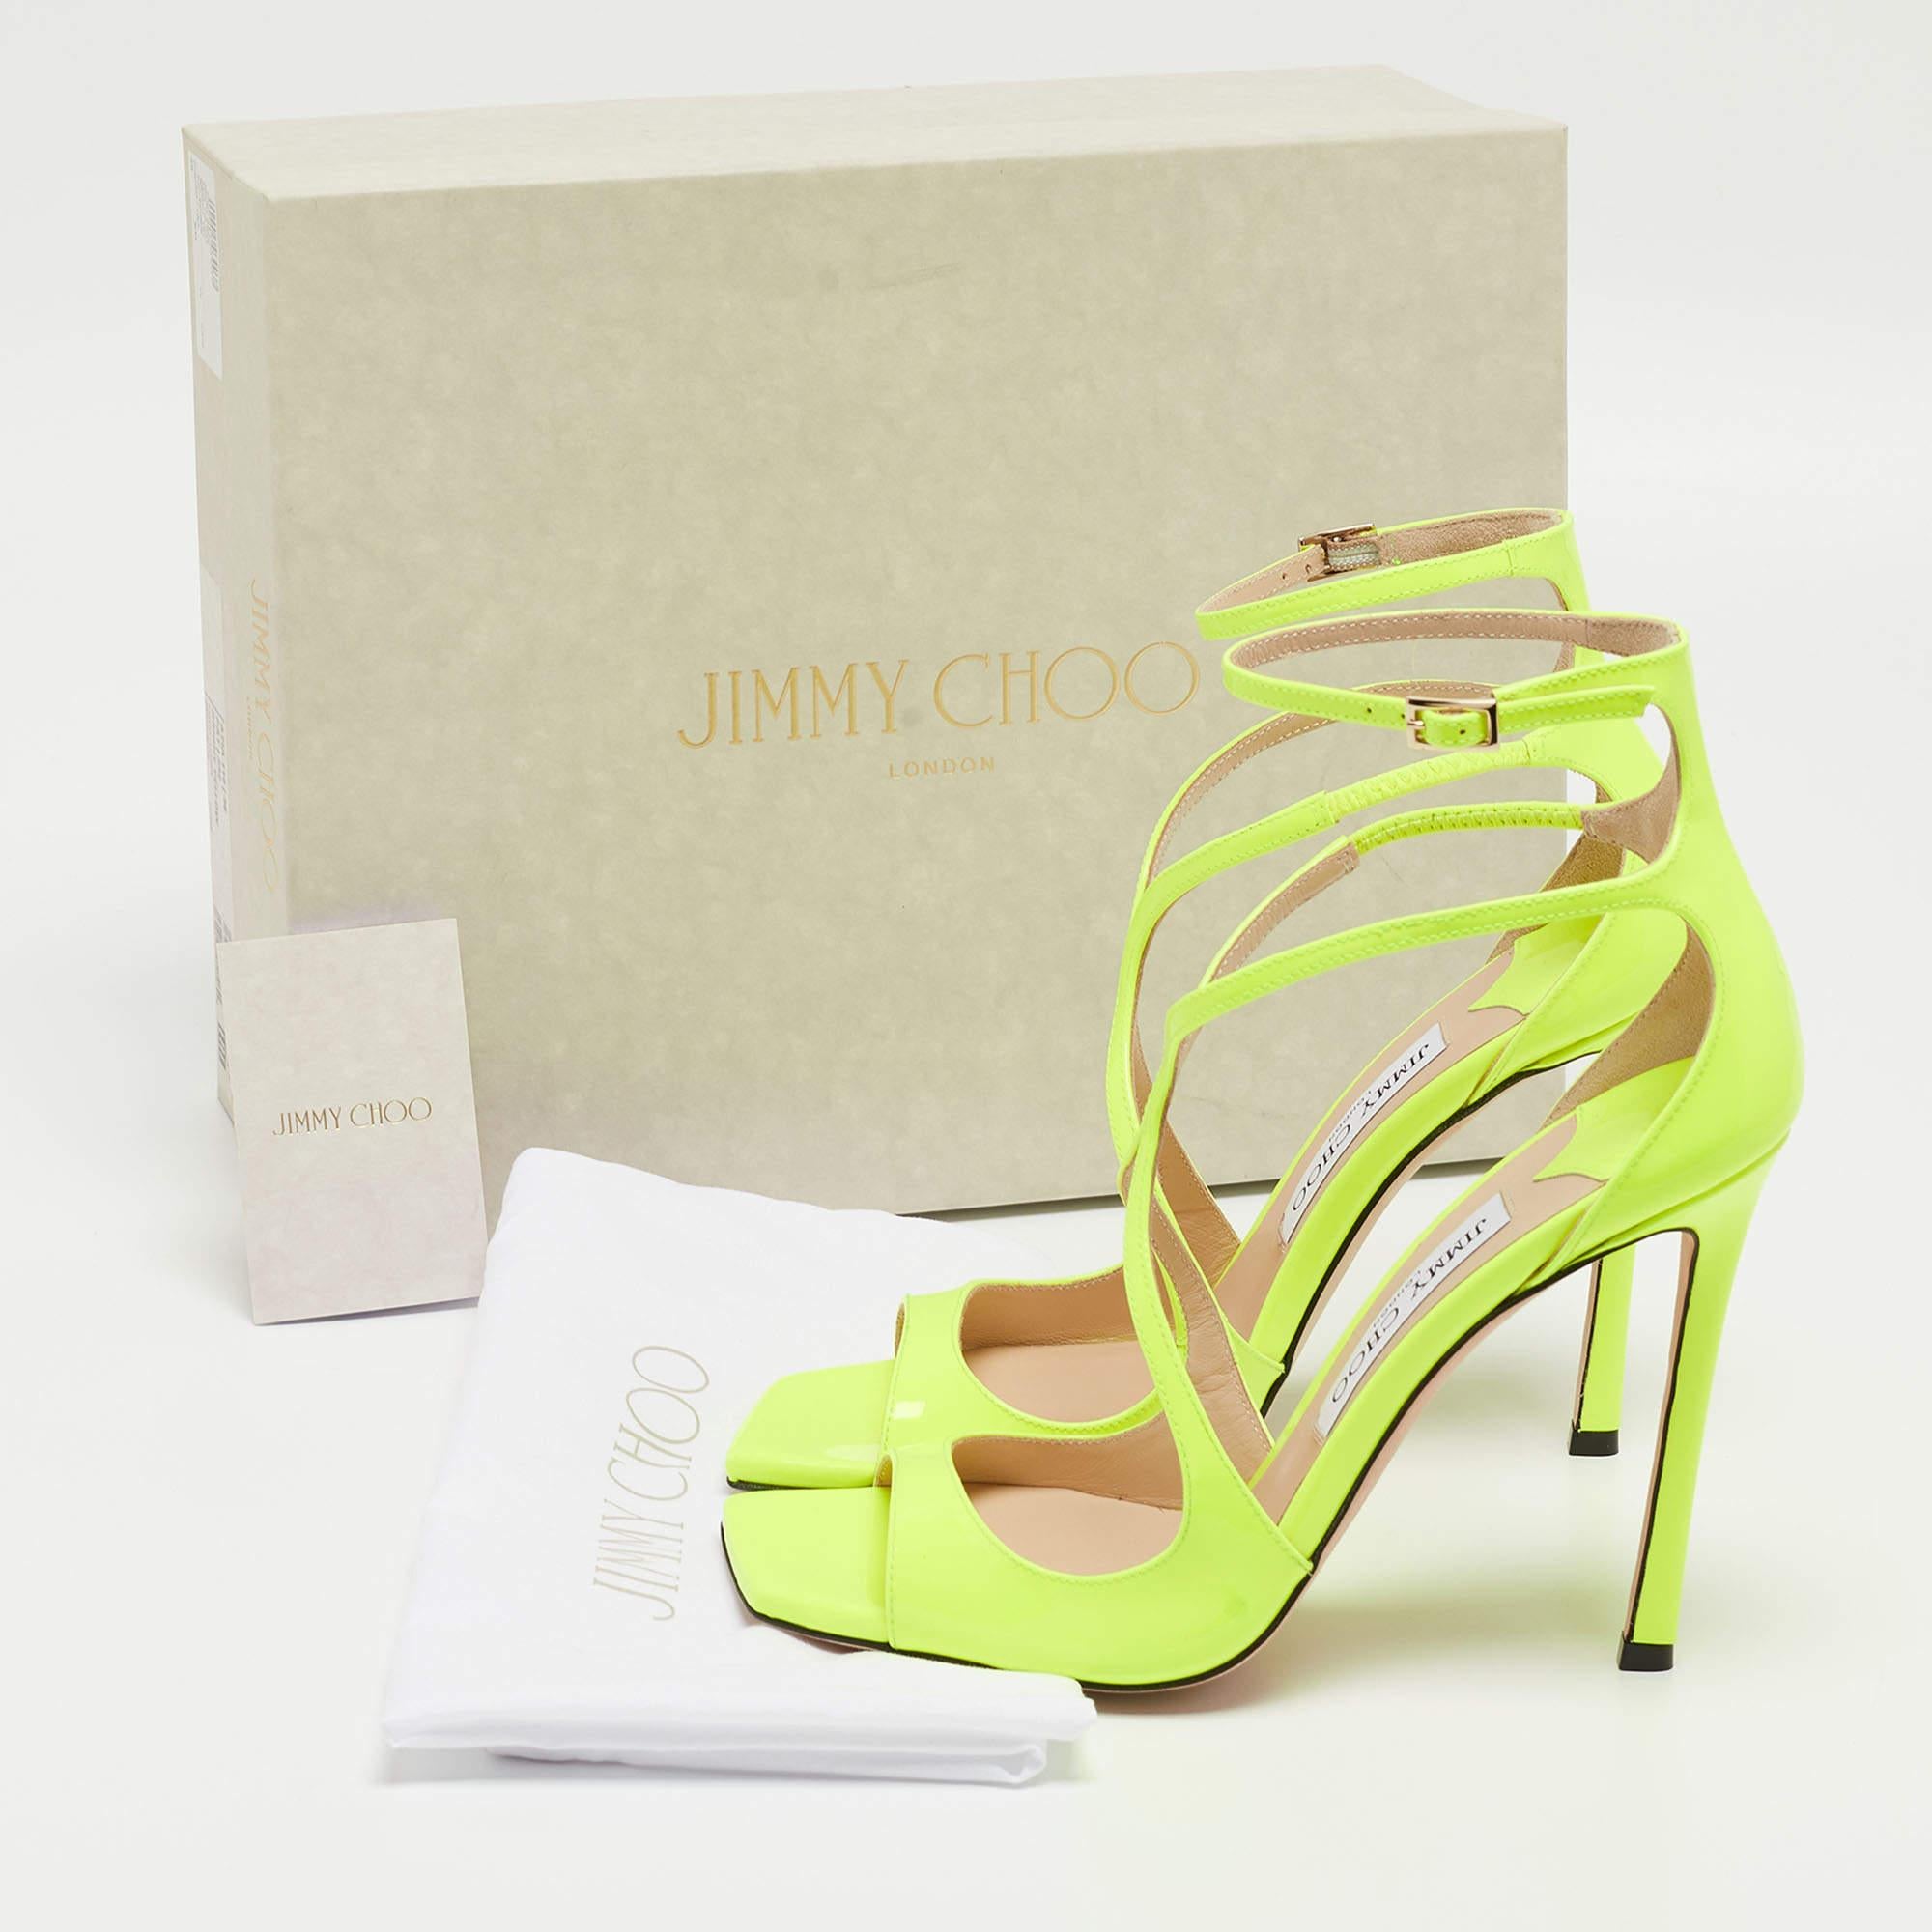 Jimmy Choo Neon Yellow Patent Leather Azia Ankle Strap Sandals Size 38 5